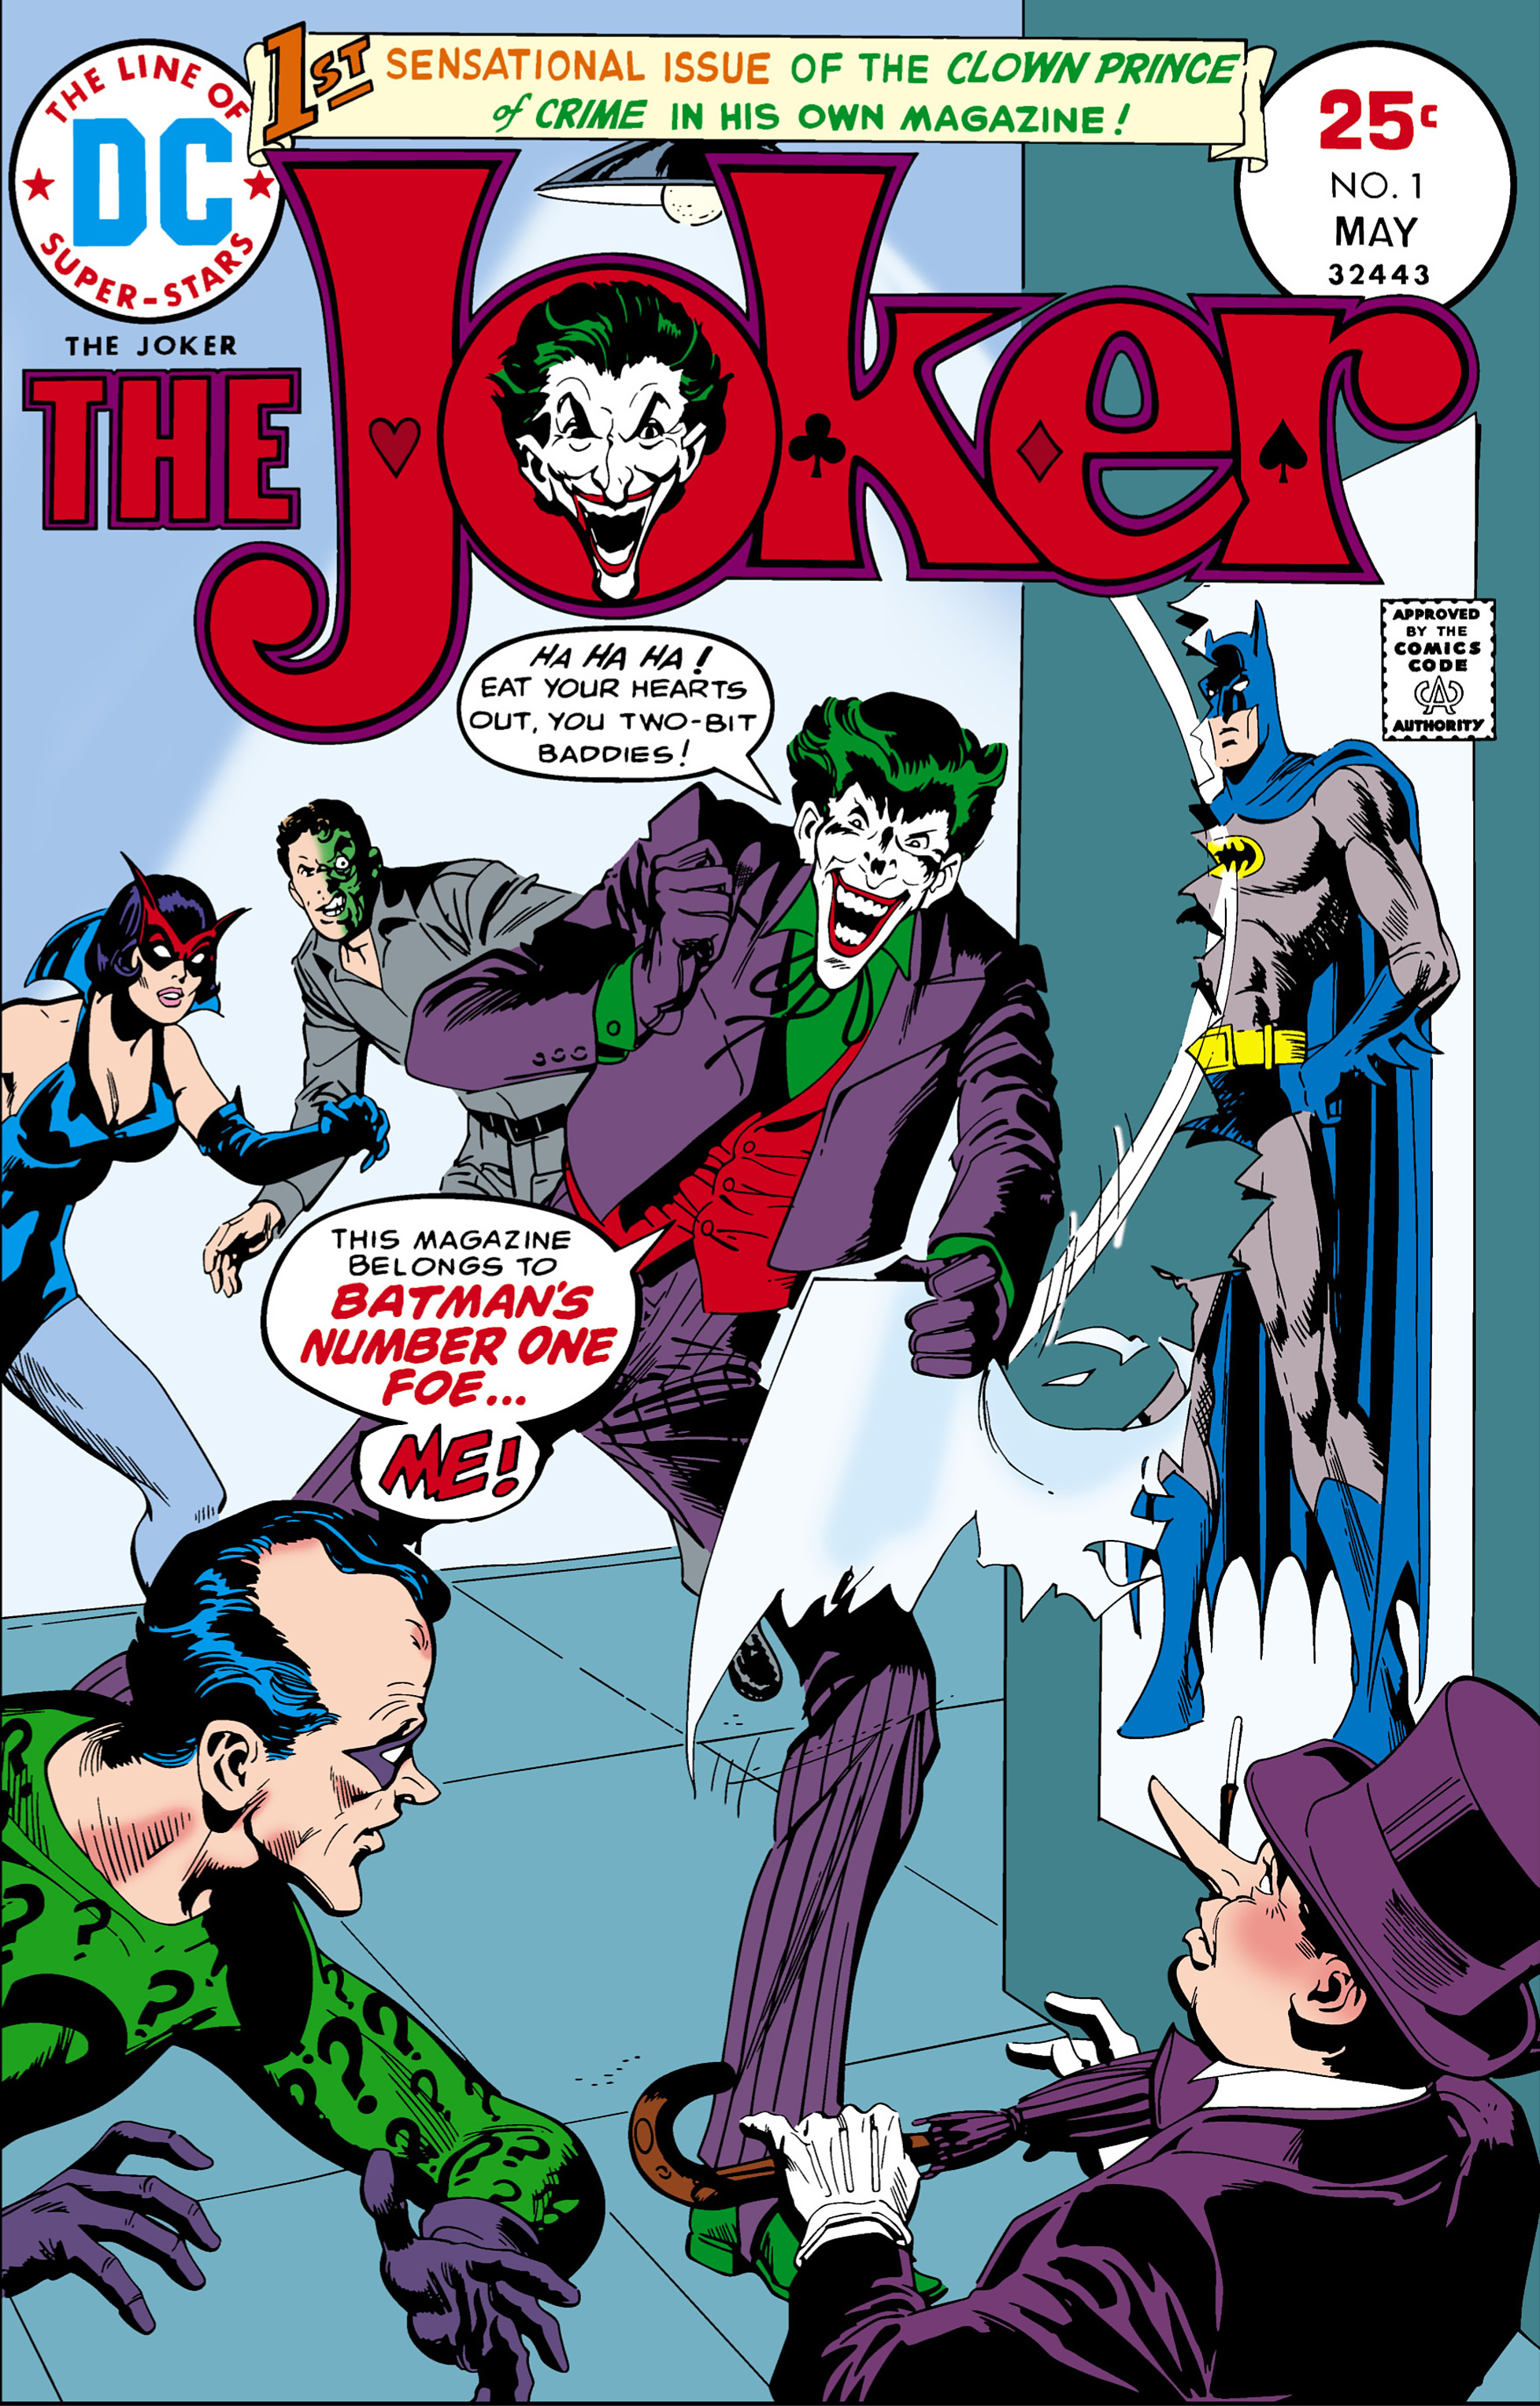 The Joker (1975-1976 + 2019): Chapter 1 - Page 1